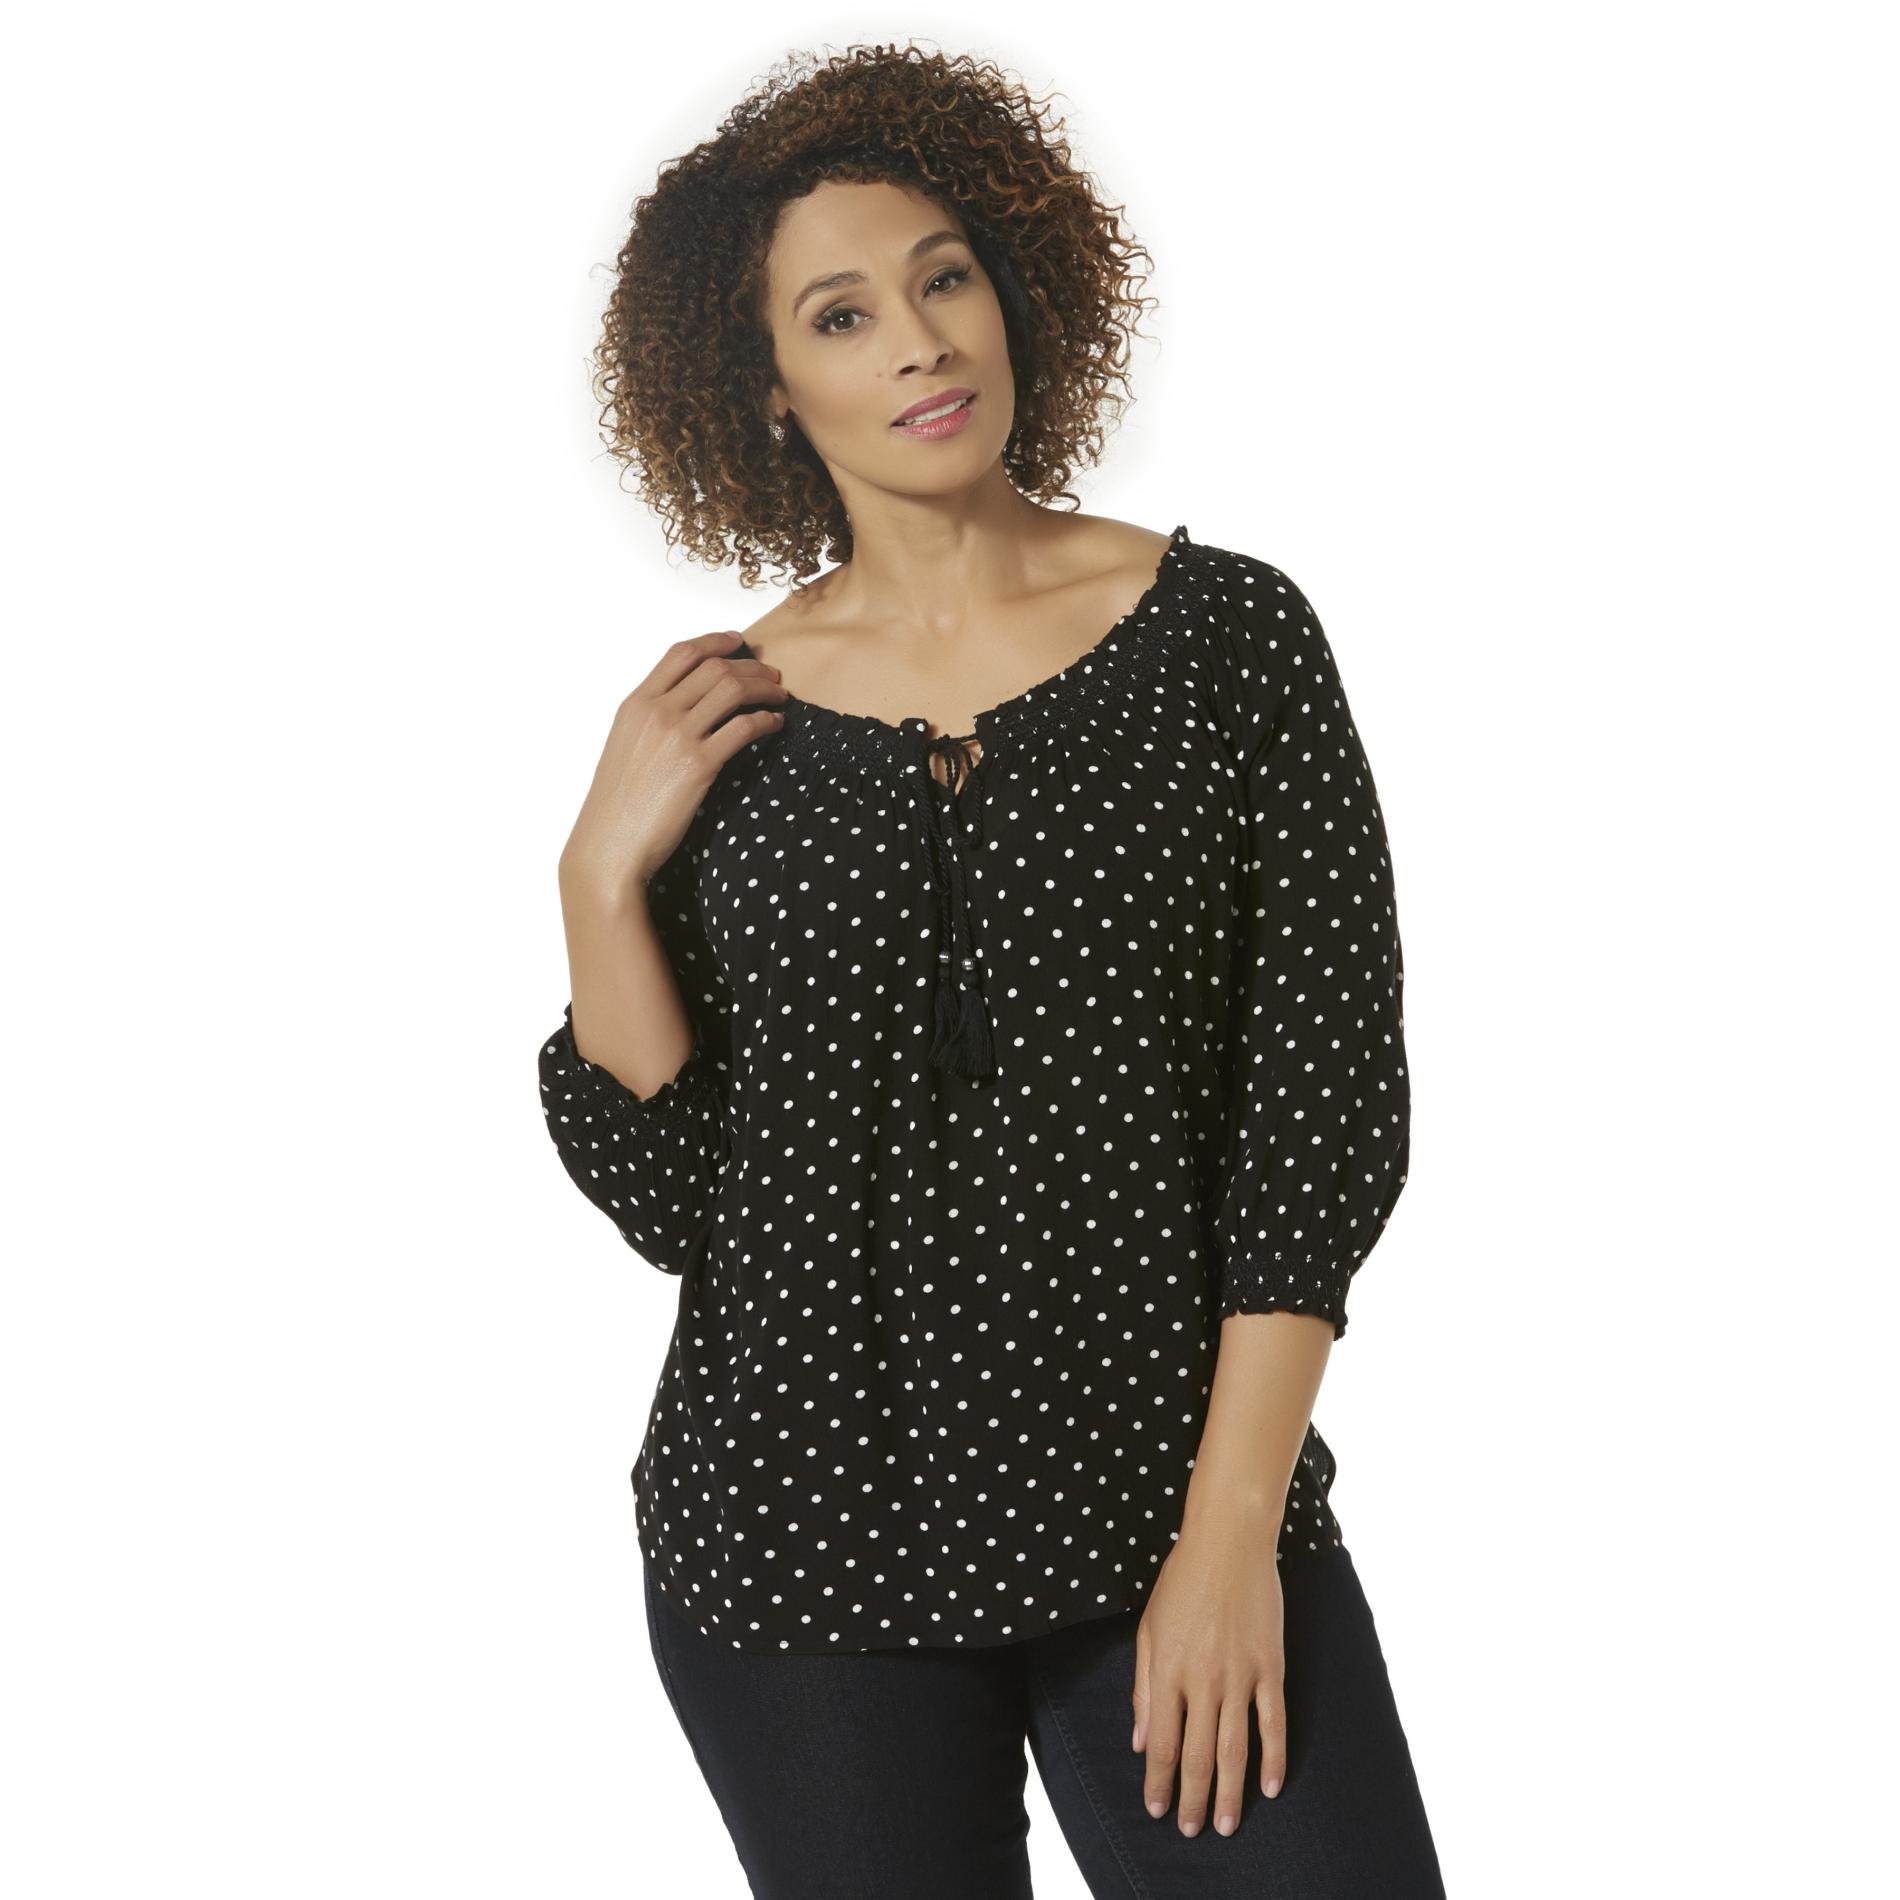 Basic Editions Women's Plus Smocked Peasant Top - Polka Dots